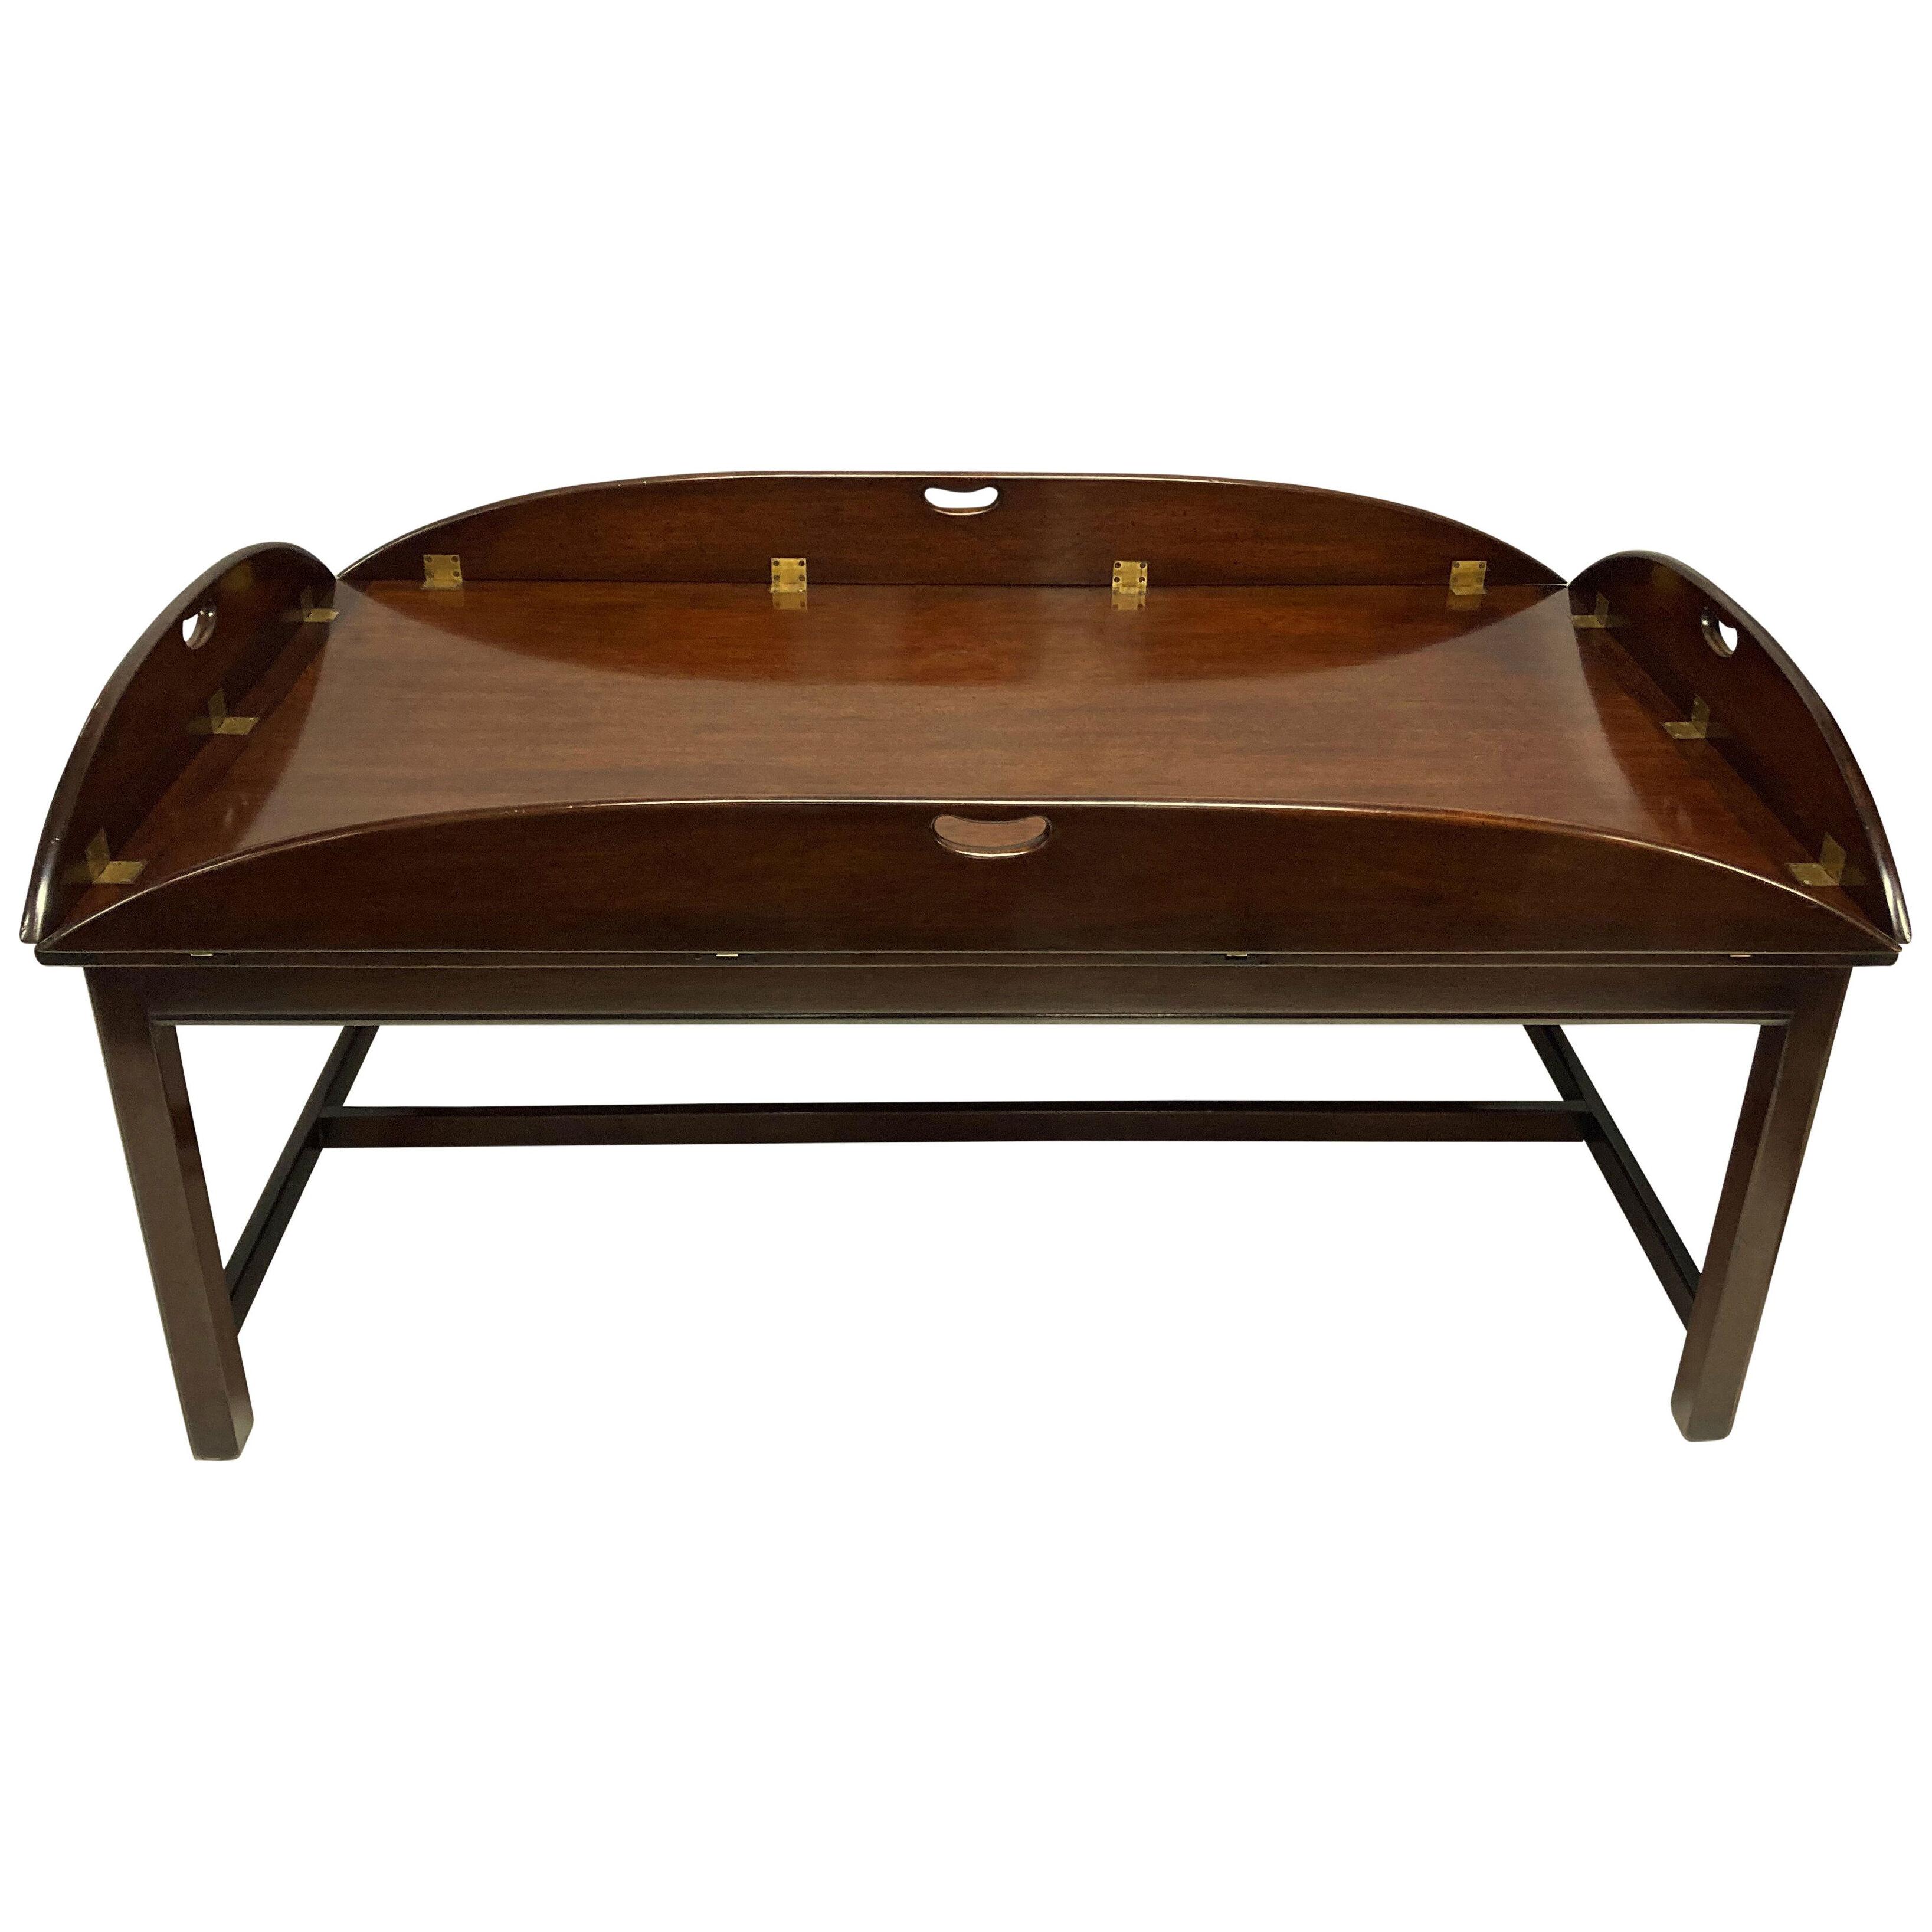 AN OVER-SCALE ENGLISH MAHOGANY BUTLERS OCCASIONAL TABLE